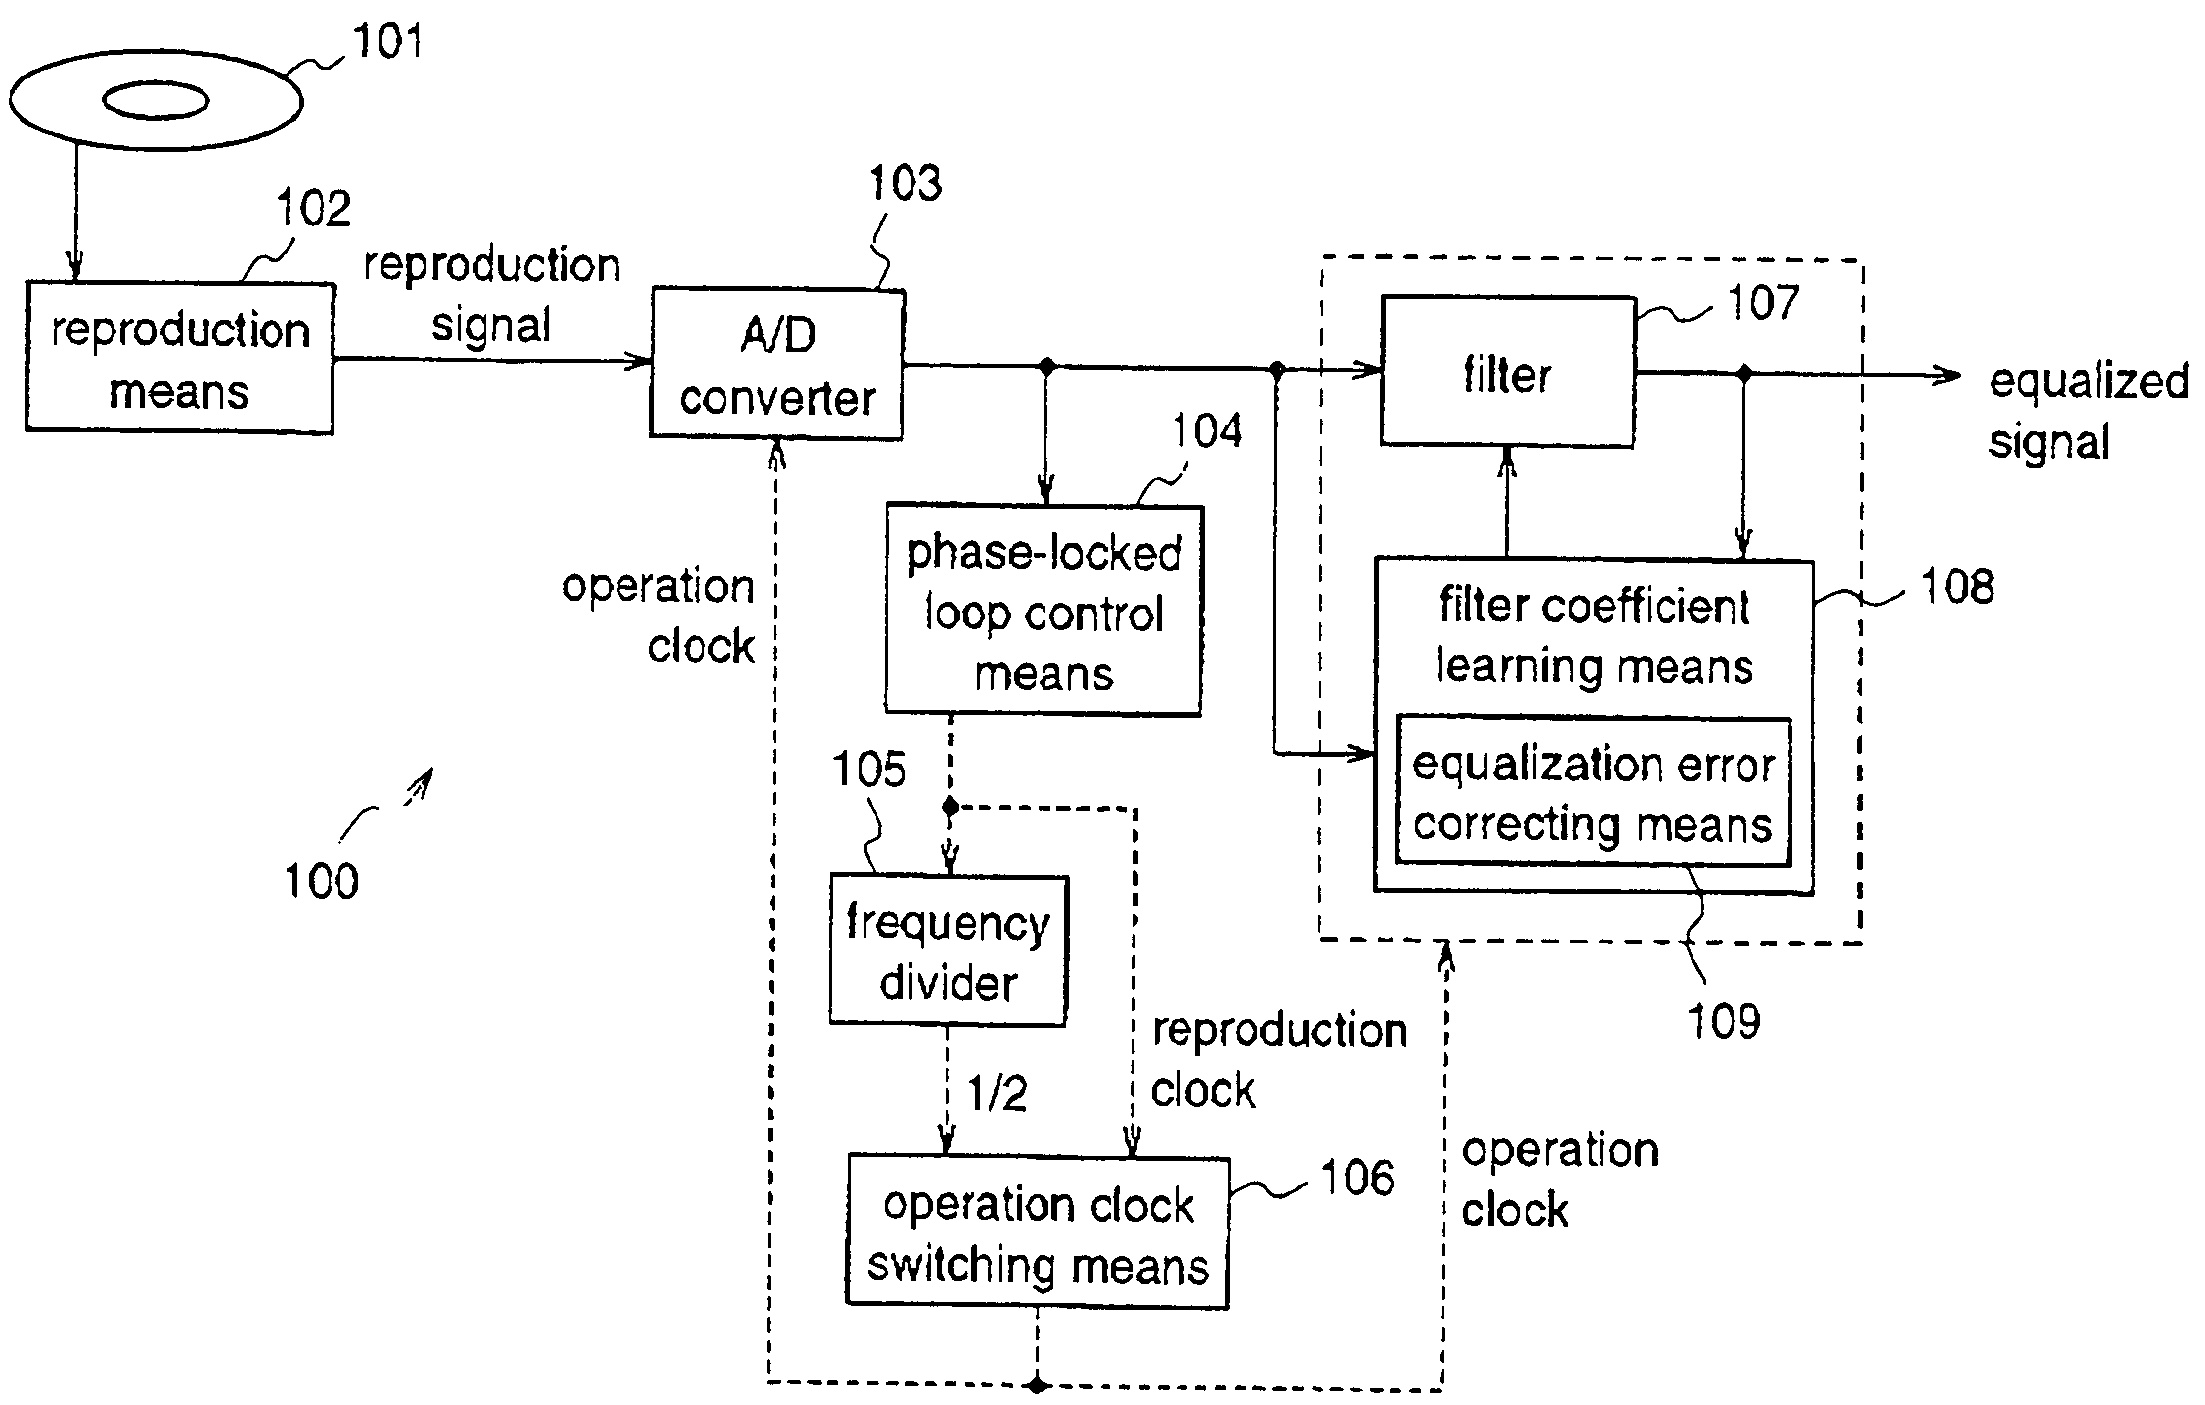 Reproduction signal processing apparatus and optical disc player including the same